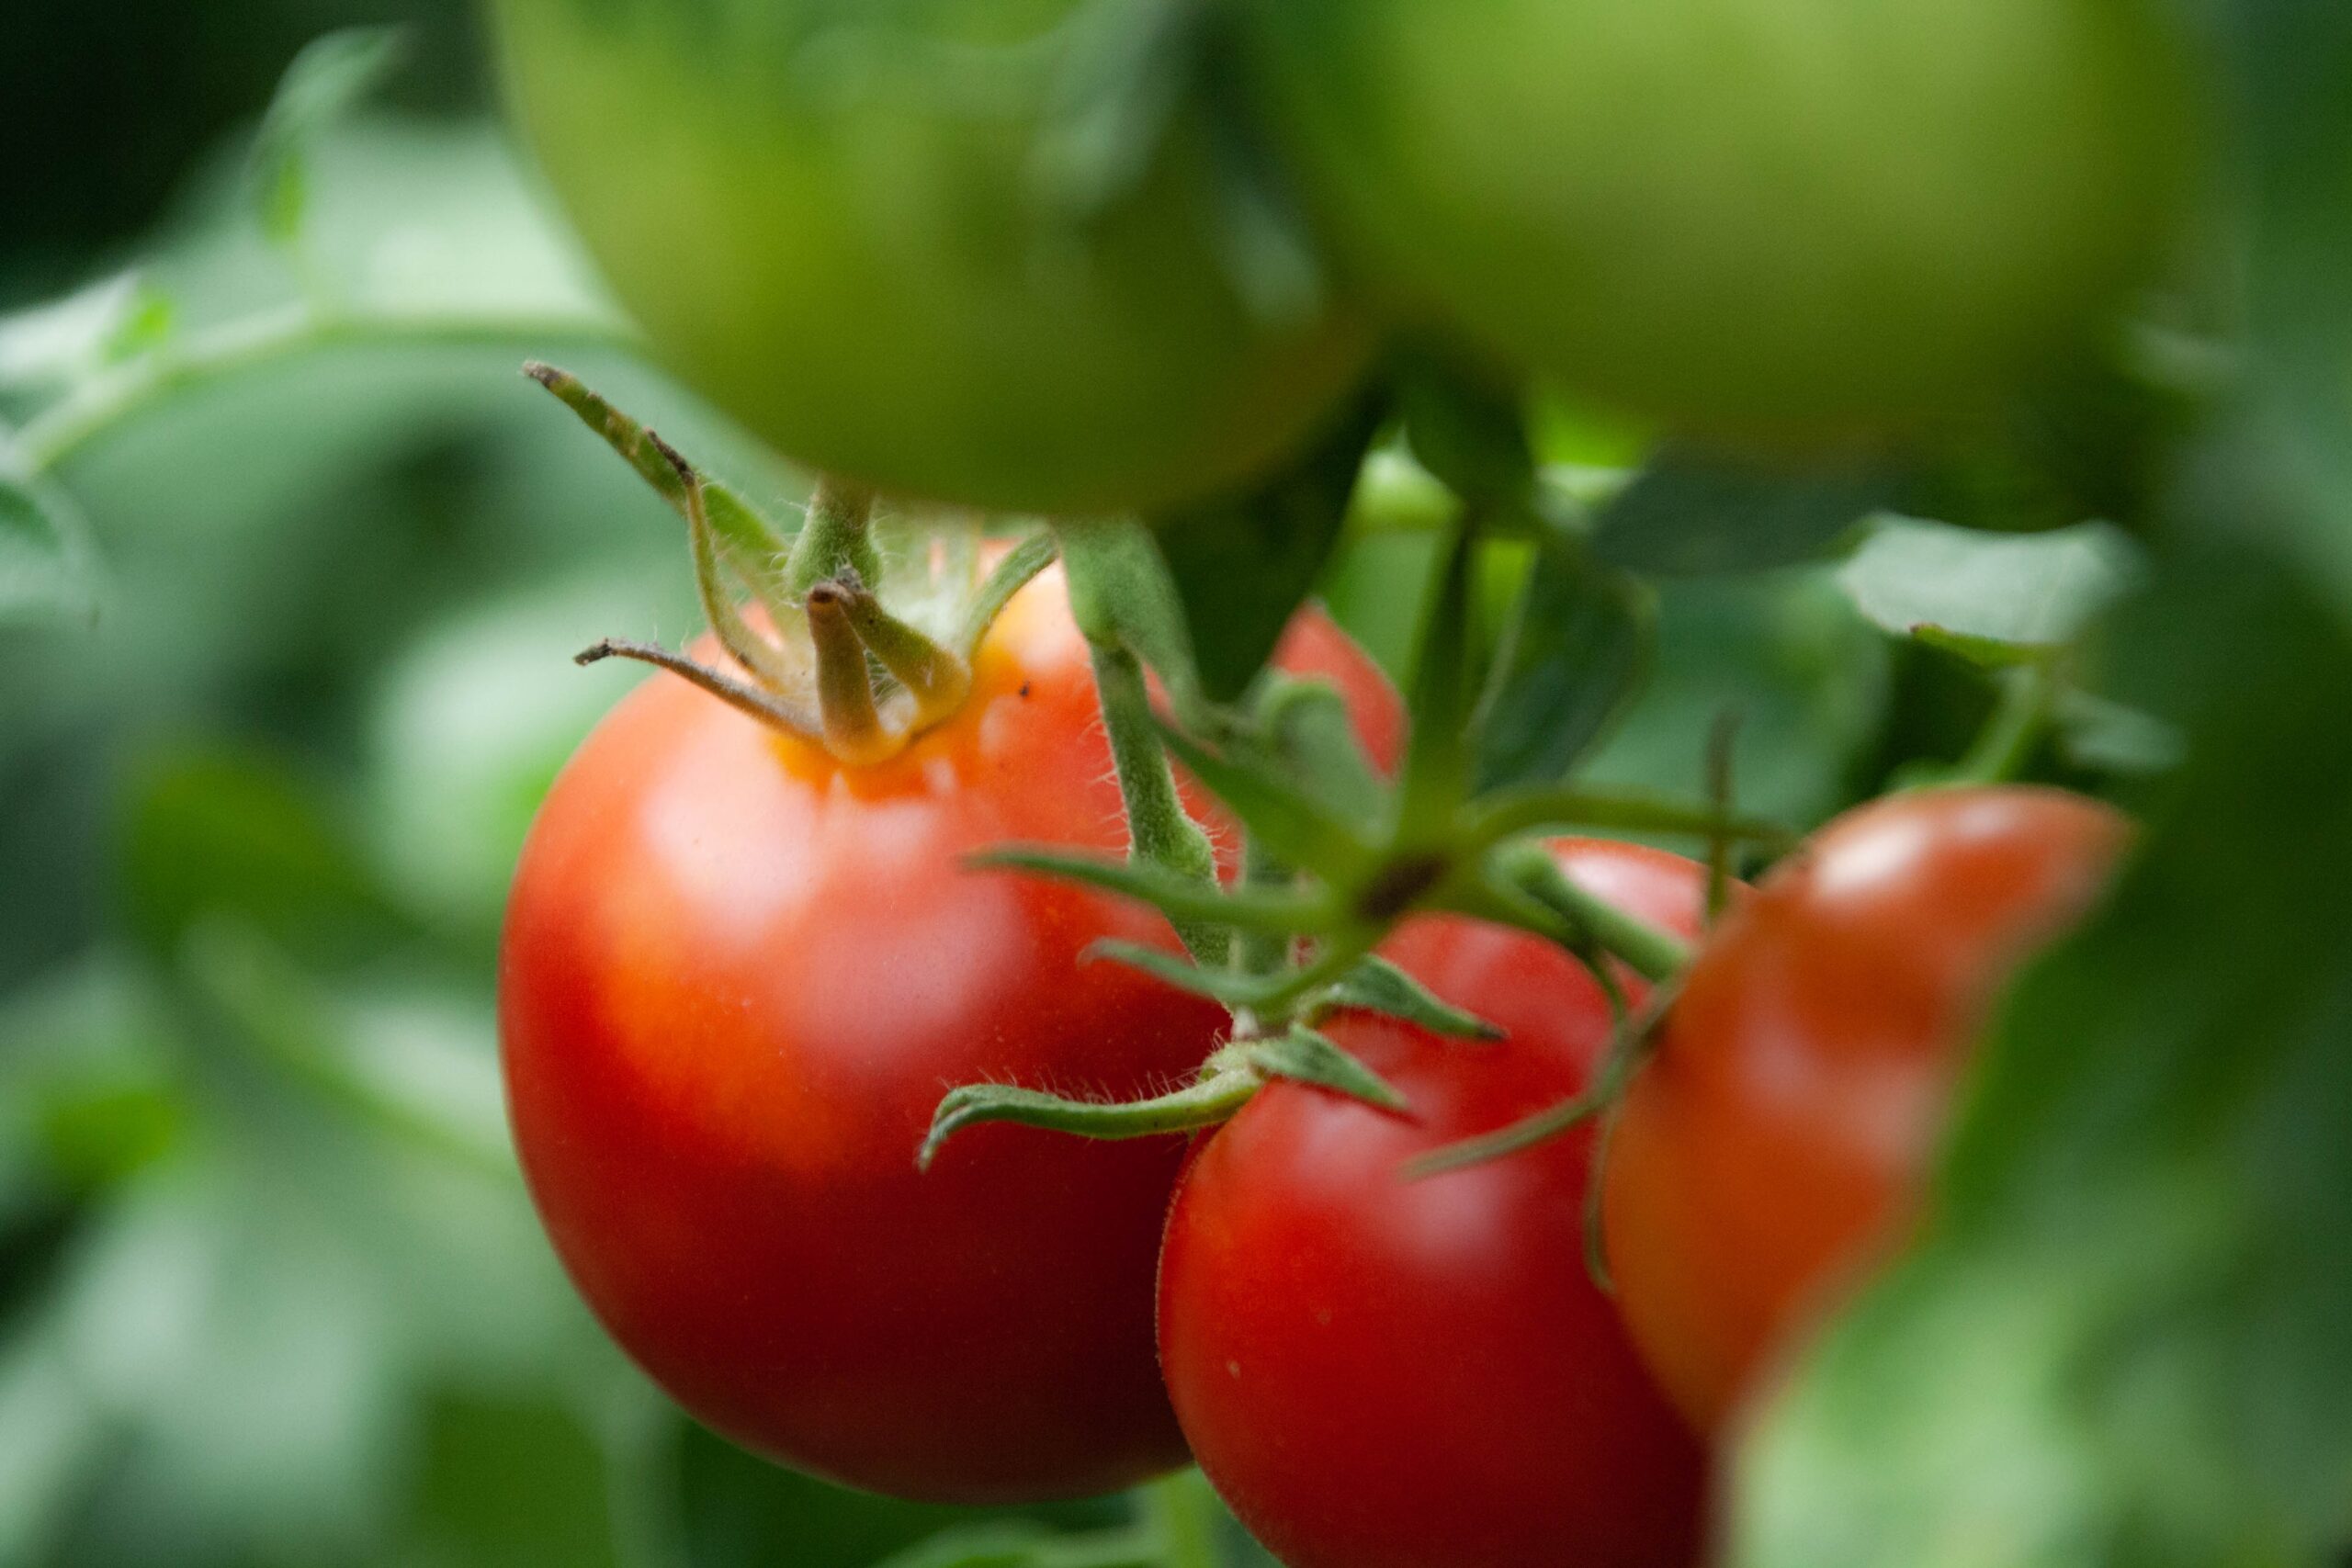 Grow These 5 Delicious Tomatoes for Tomato Sauce